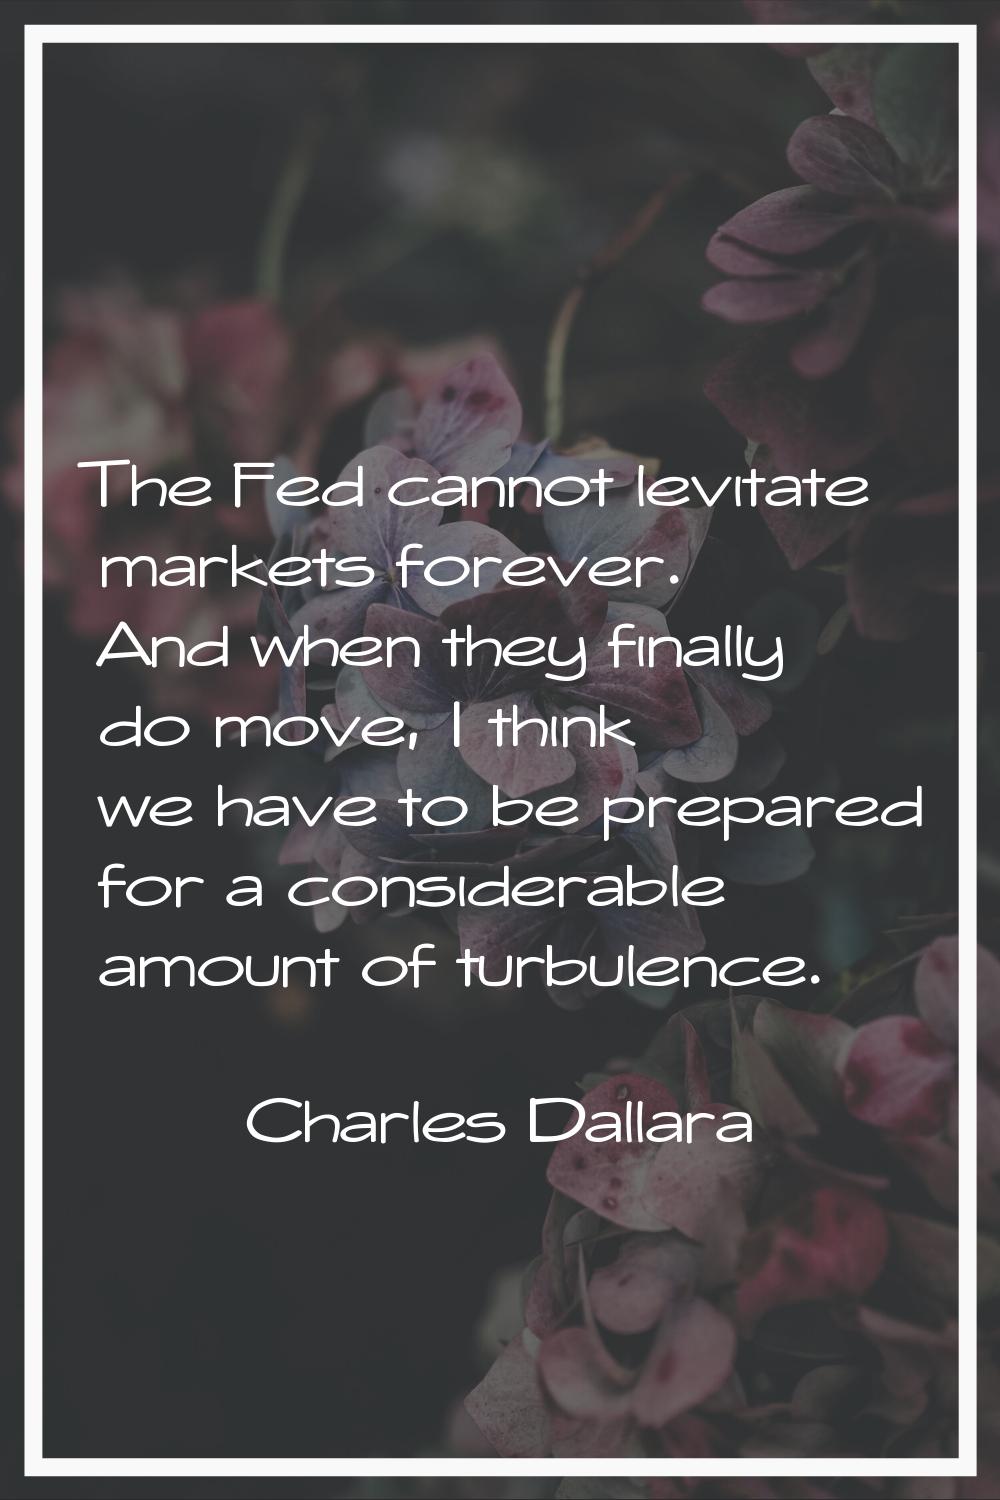 The Fed cannot levitate markets forever. And when they finally do move, I think we have to be prepa